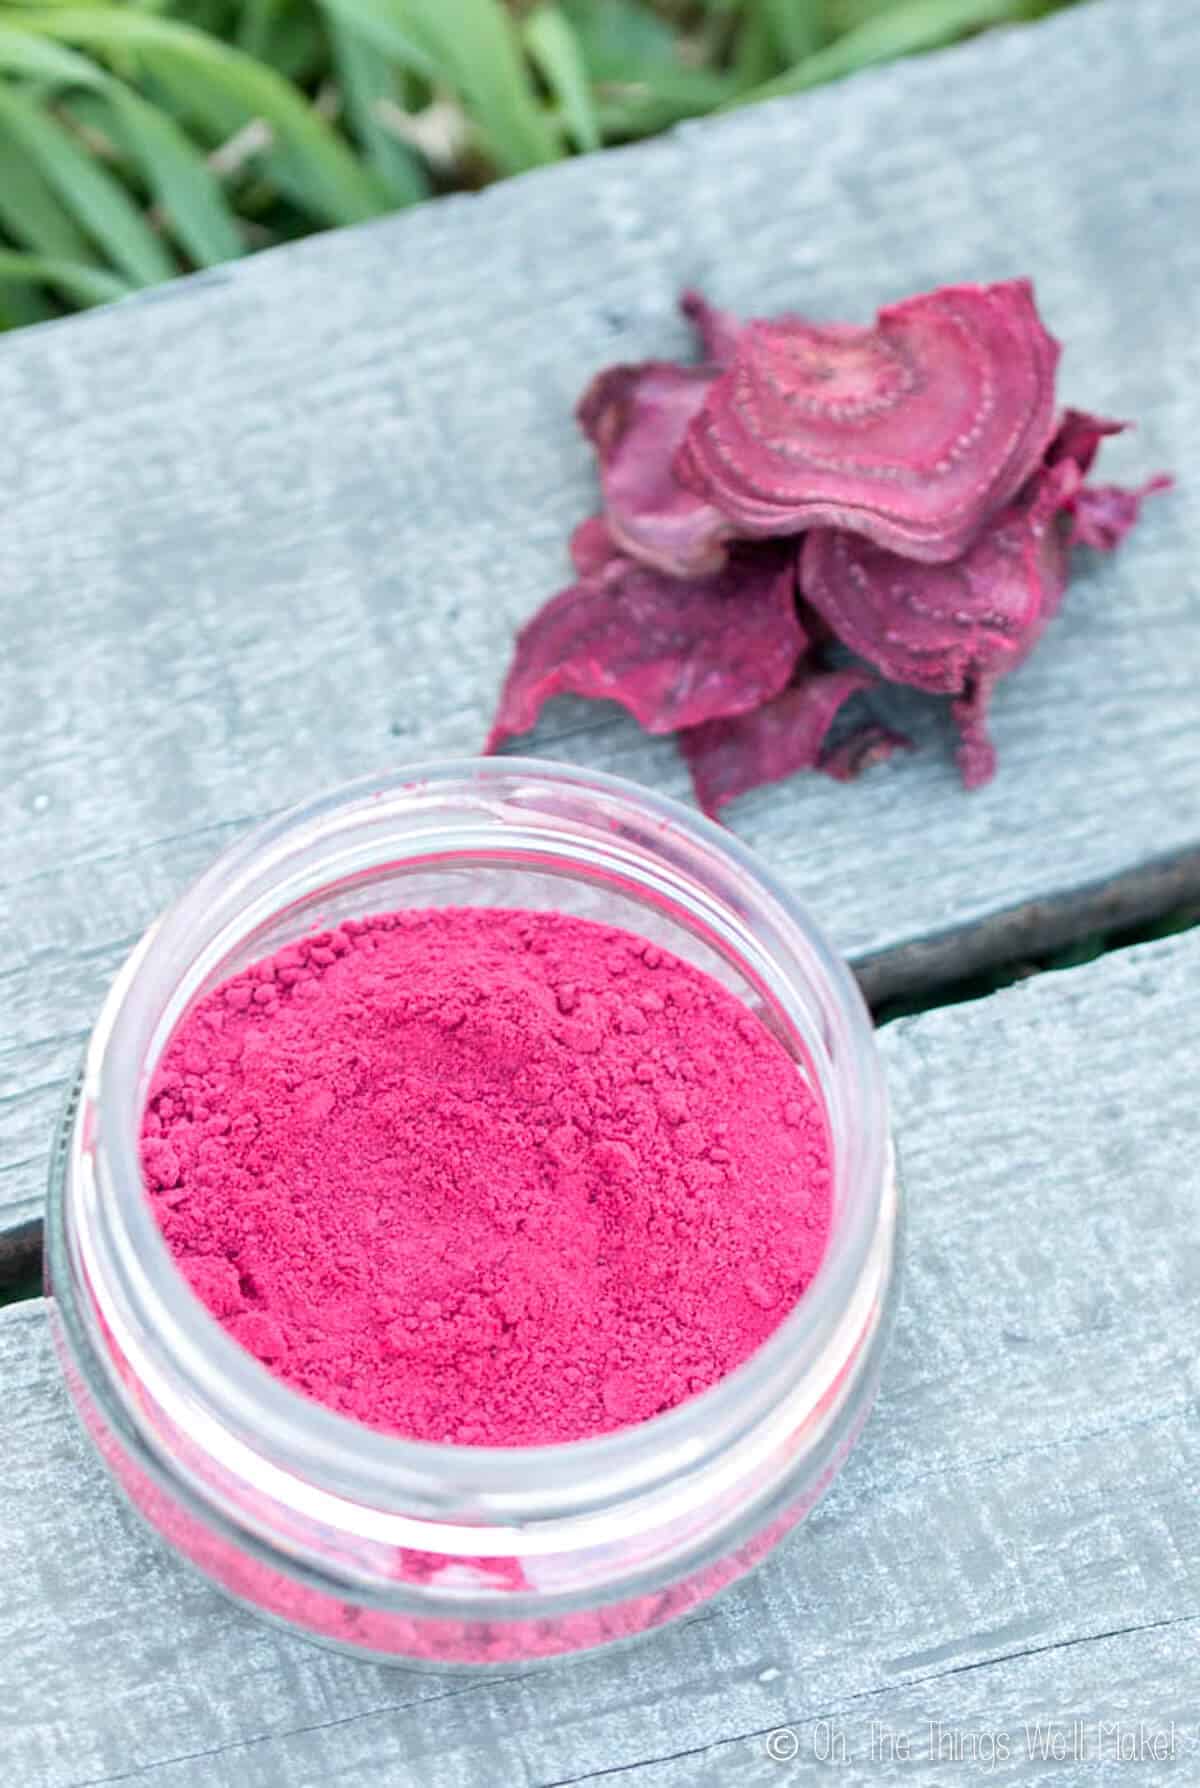 Overhead view of homemade beetroot powder in an open glass jar, next to some dried beetroot slices.